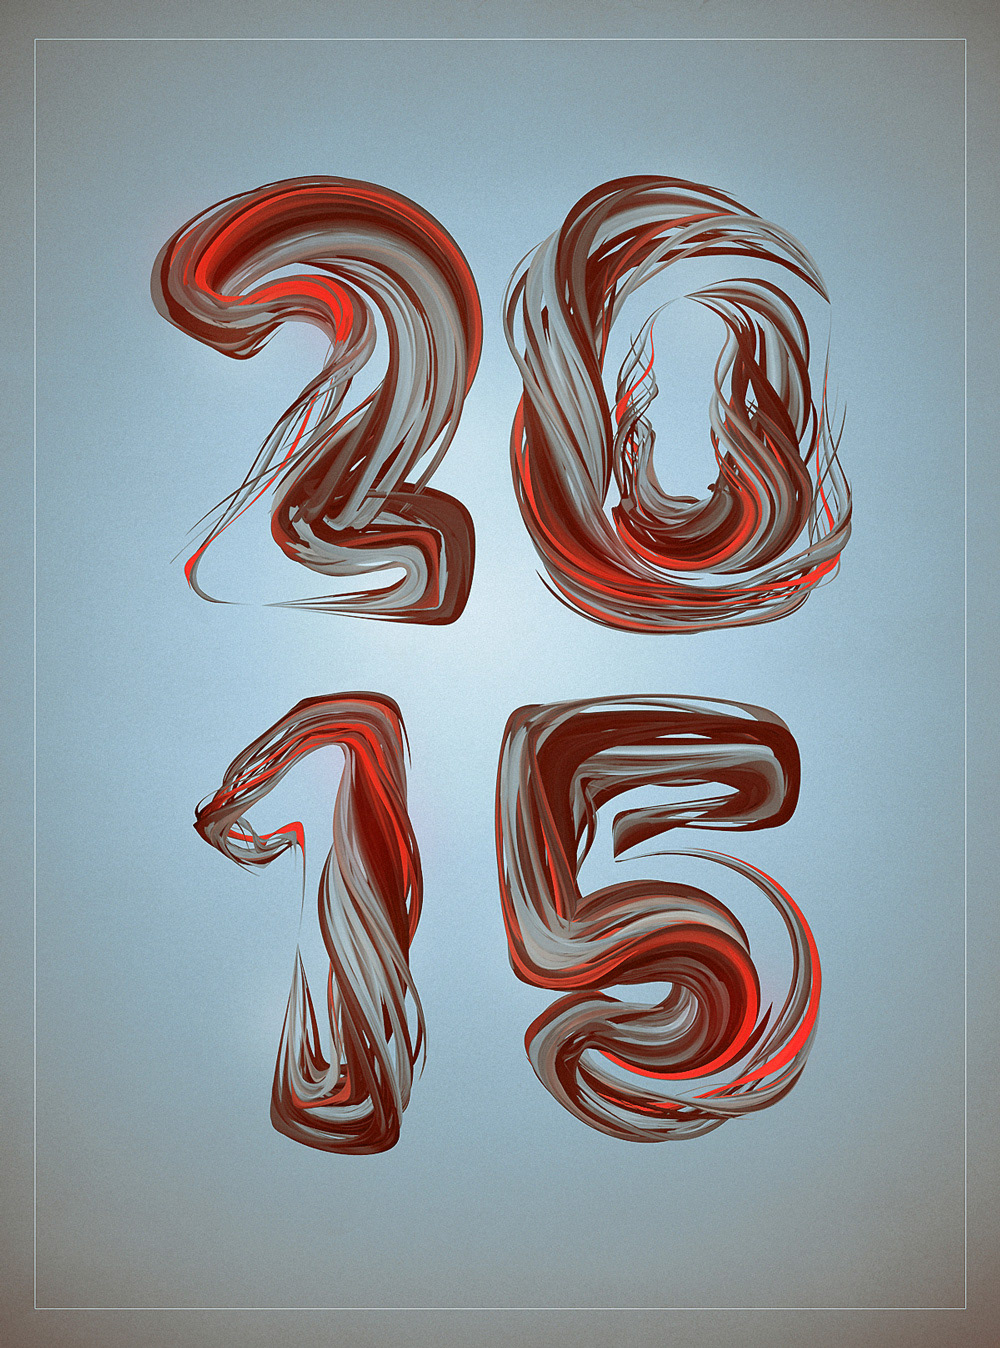 2015 year happy new year Merry Christmas lines abstract shahan keuork holidays type experimental design